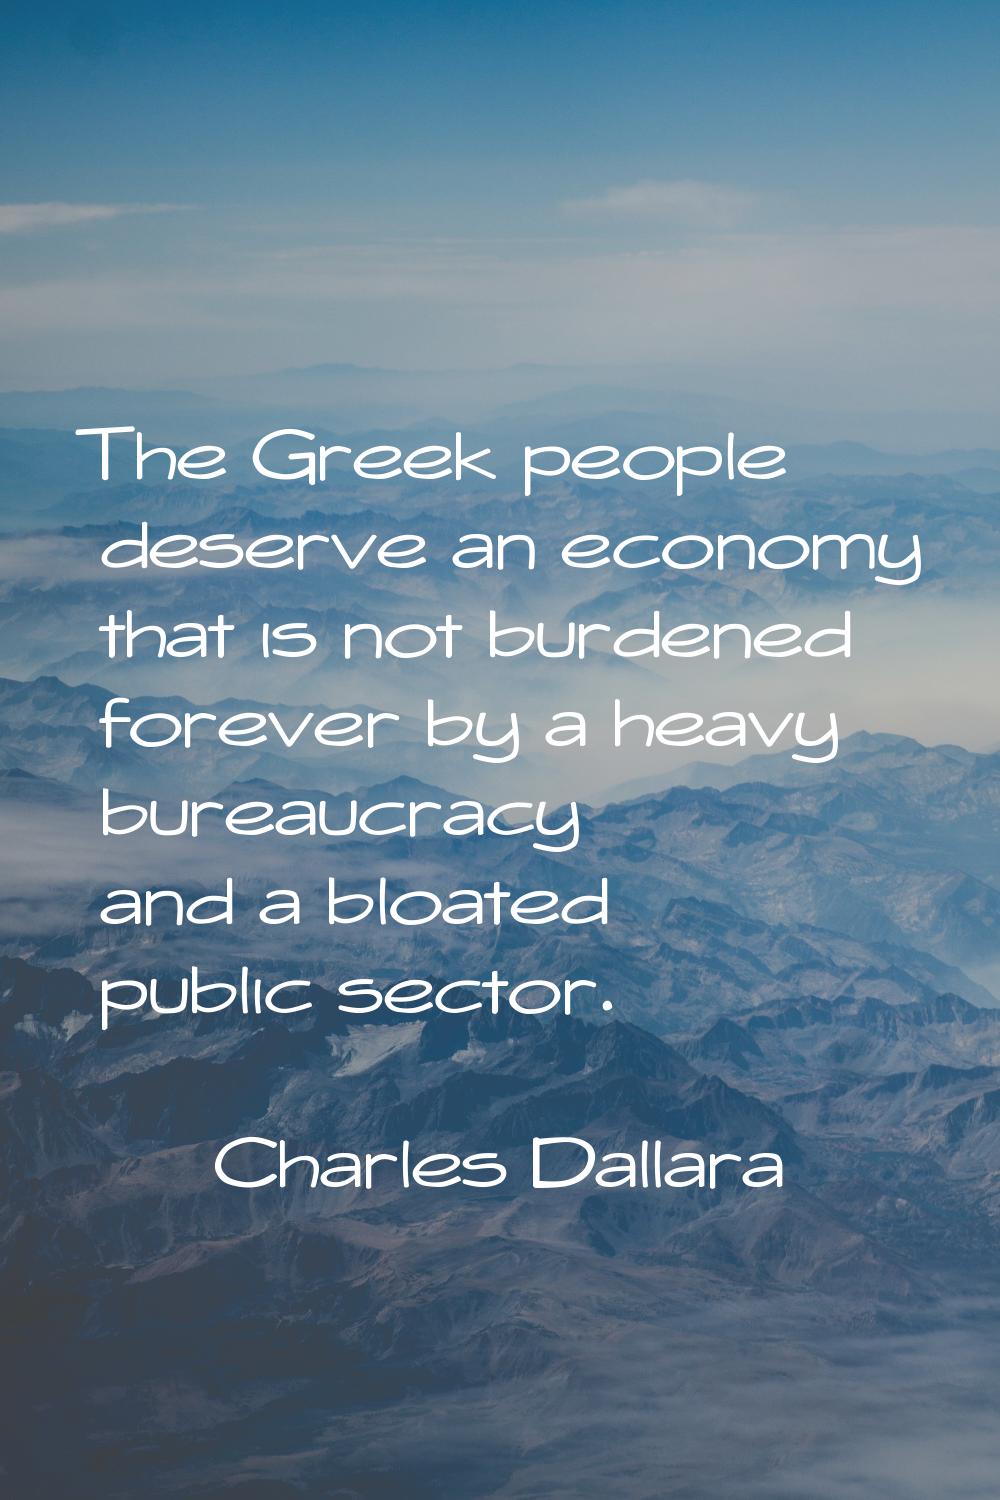 The Greek people deserve an economy that is not burdened forever by a heavy bureaucracy and a bloat